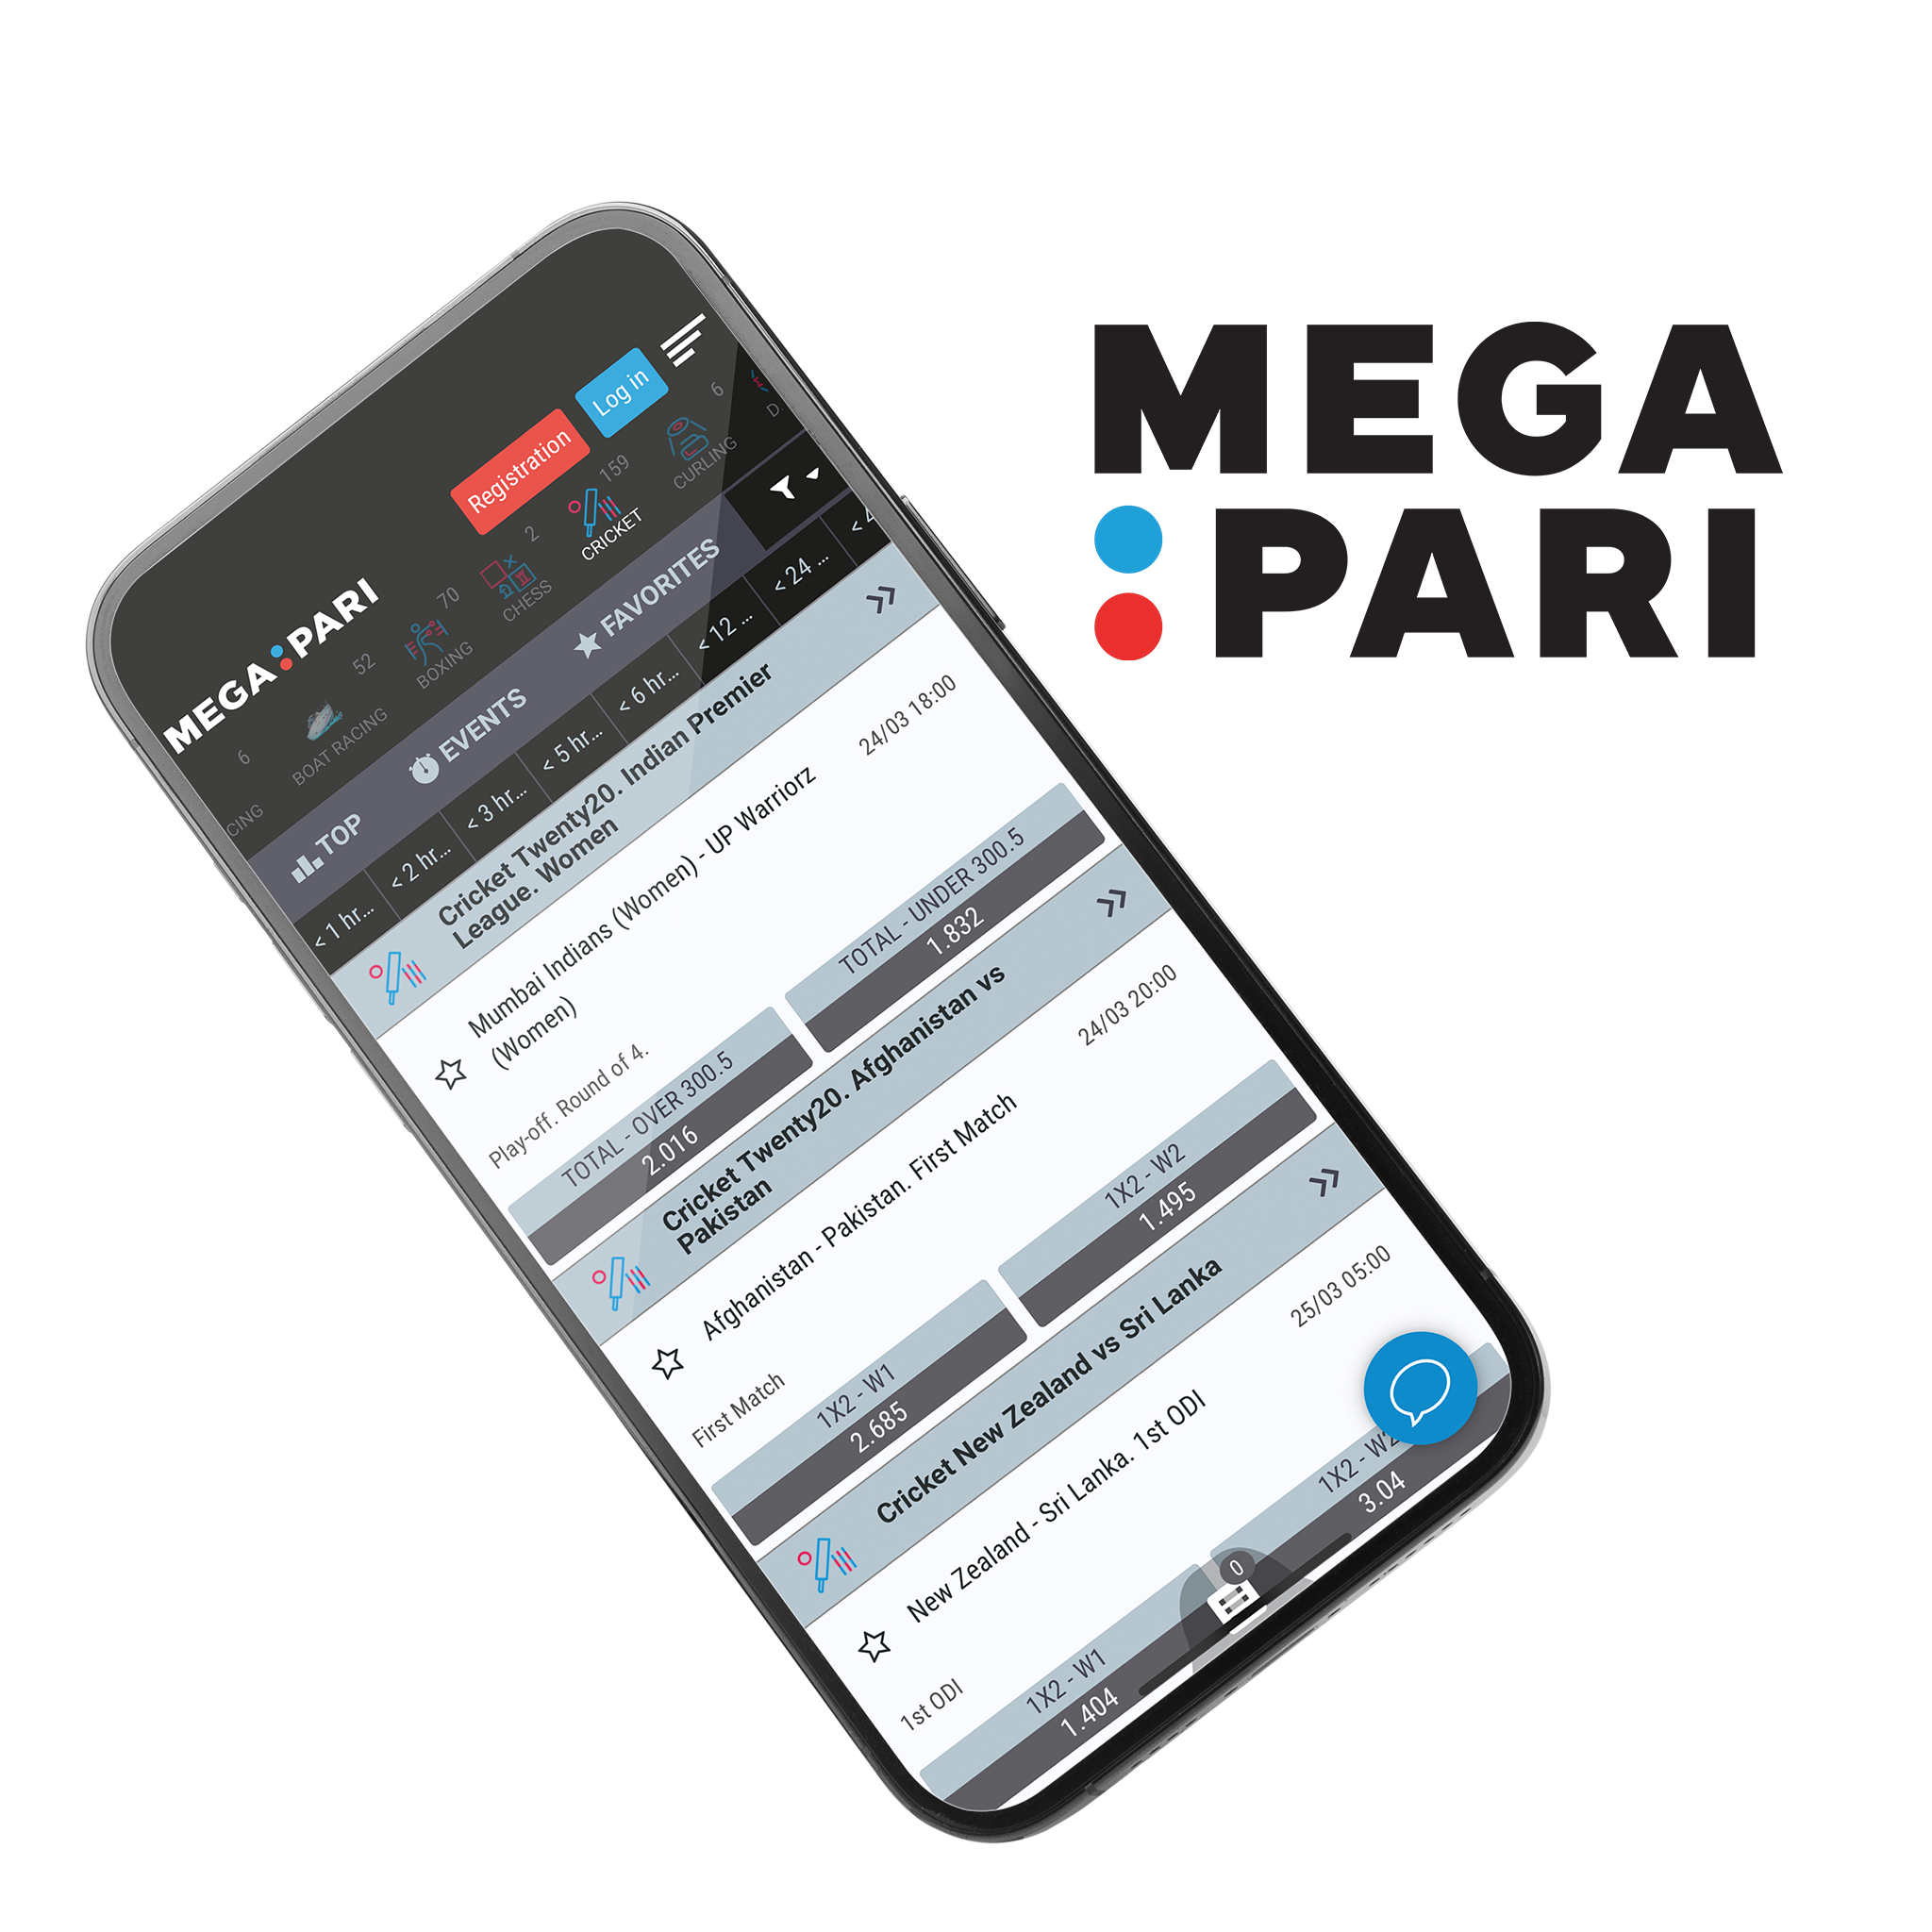 You can download and install the Megapari app for free on Android and iOS.